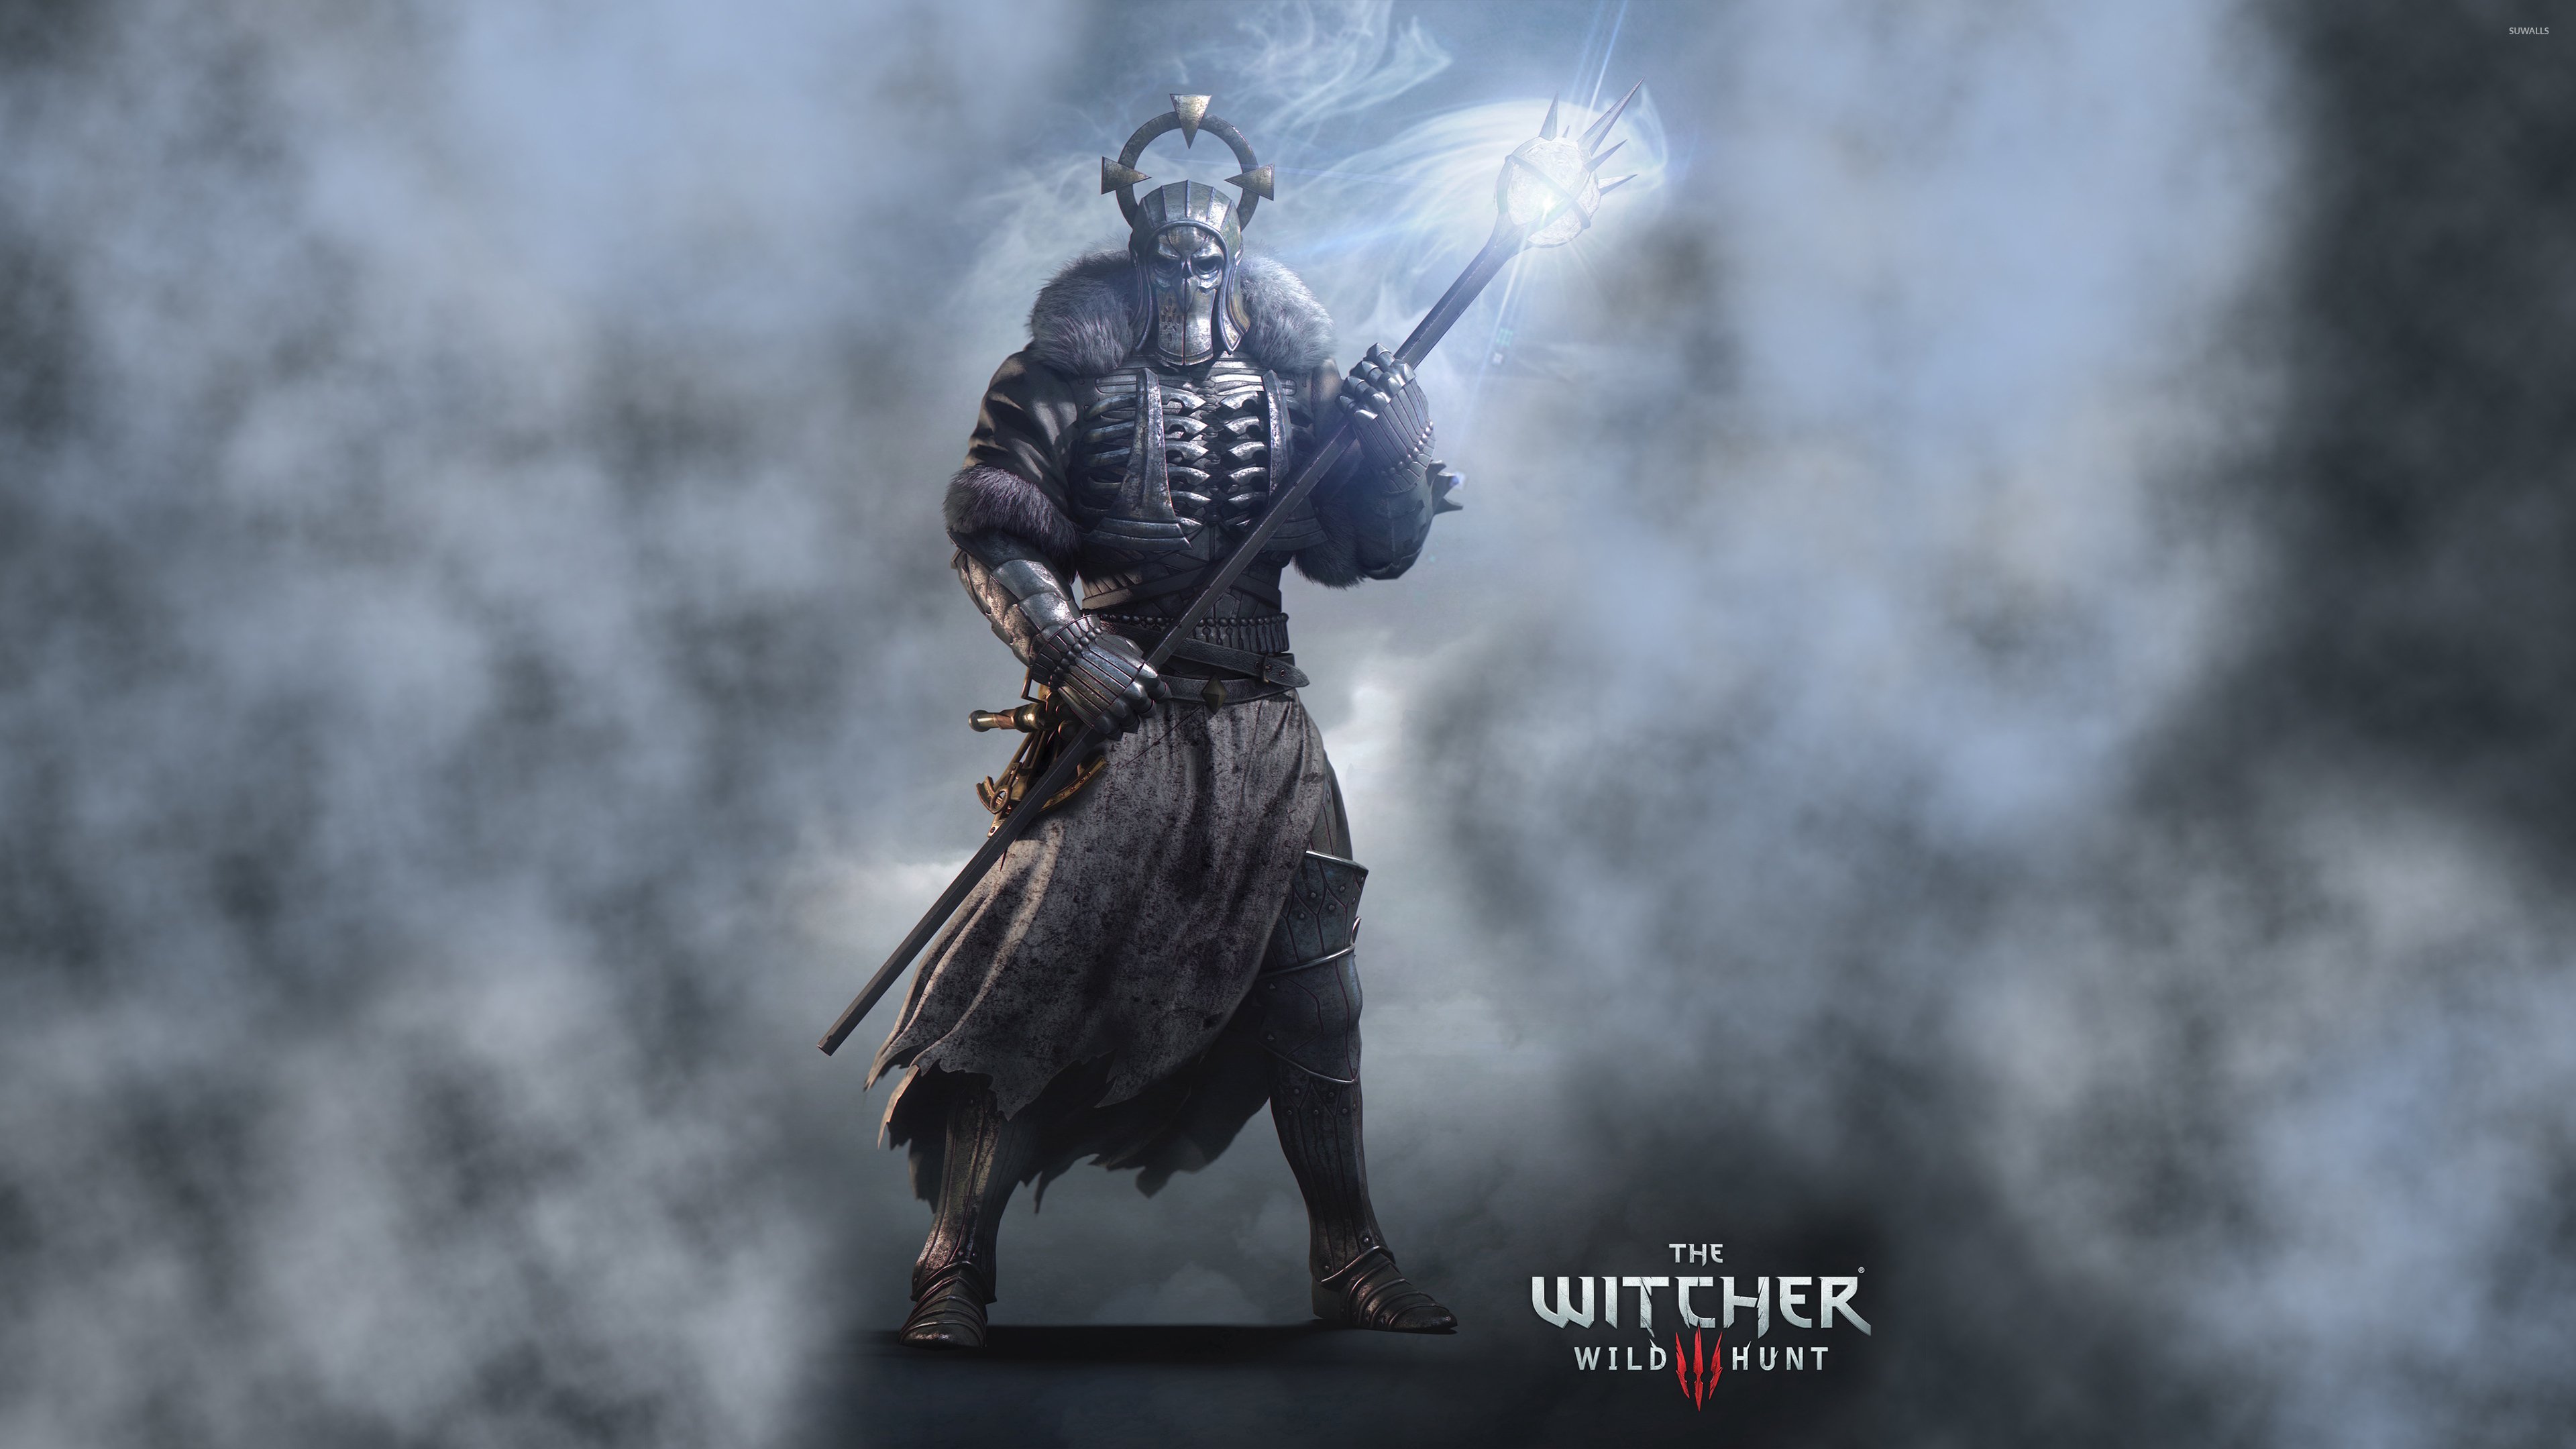 Caranthir The Witcher 3 Wild Hunt Wallpaper Game Wallpapers